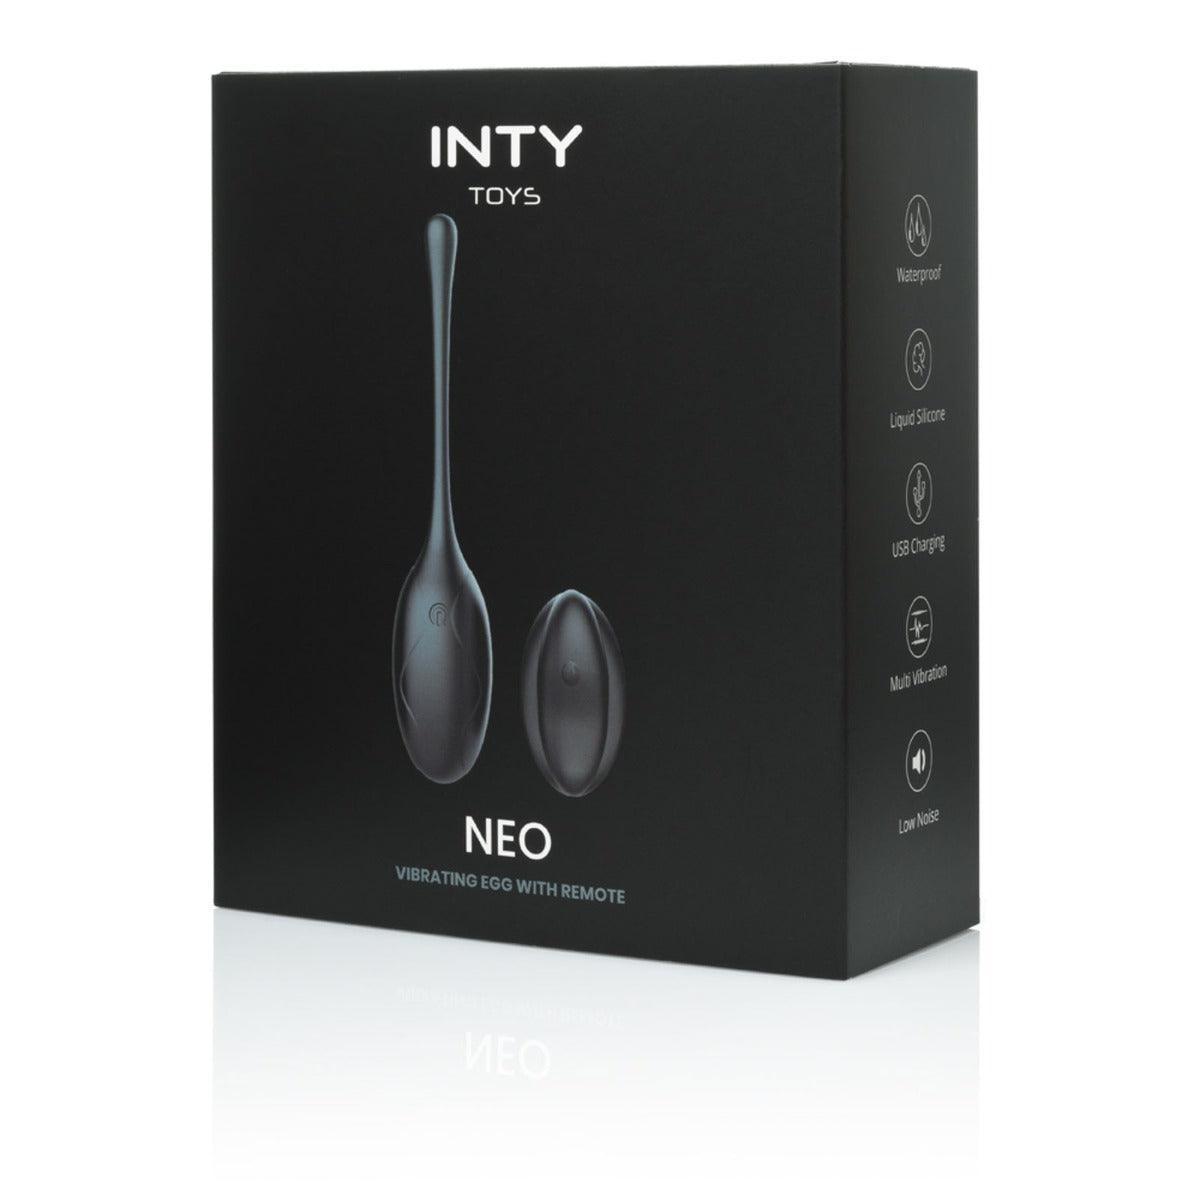 INTY Toys - Neo Vibrating Egg with Remote